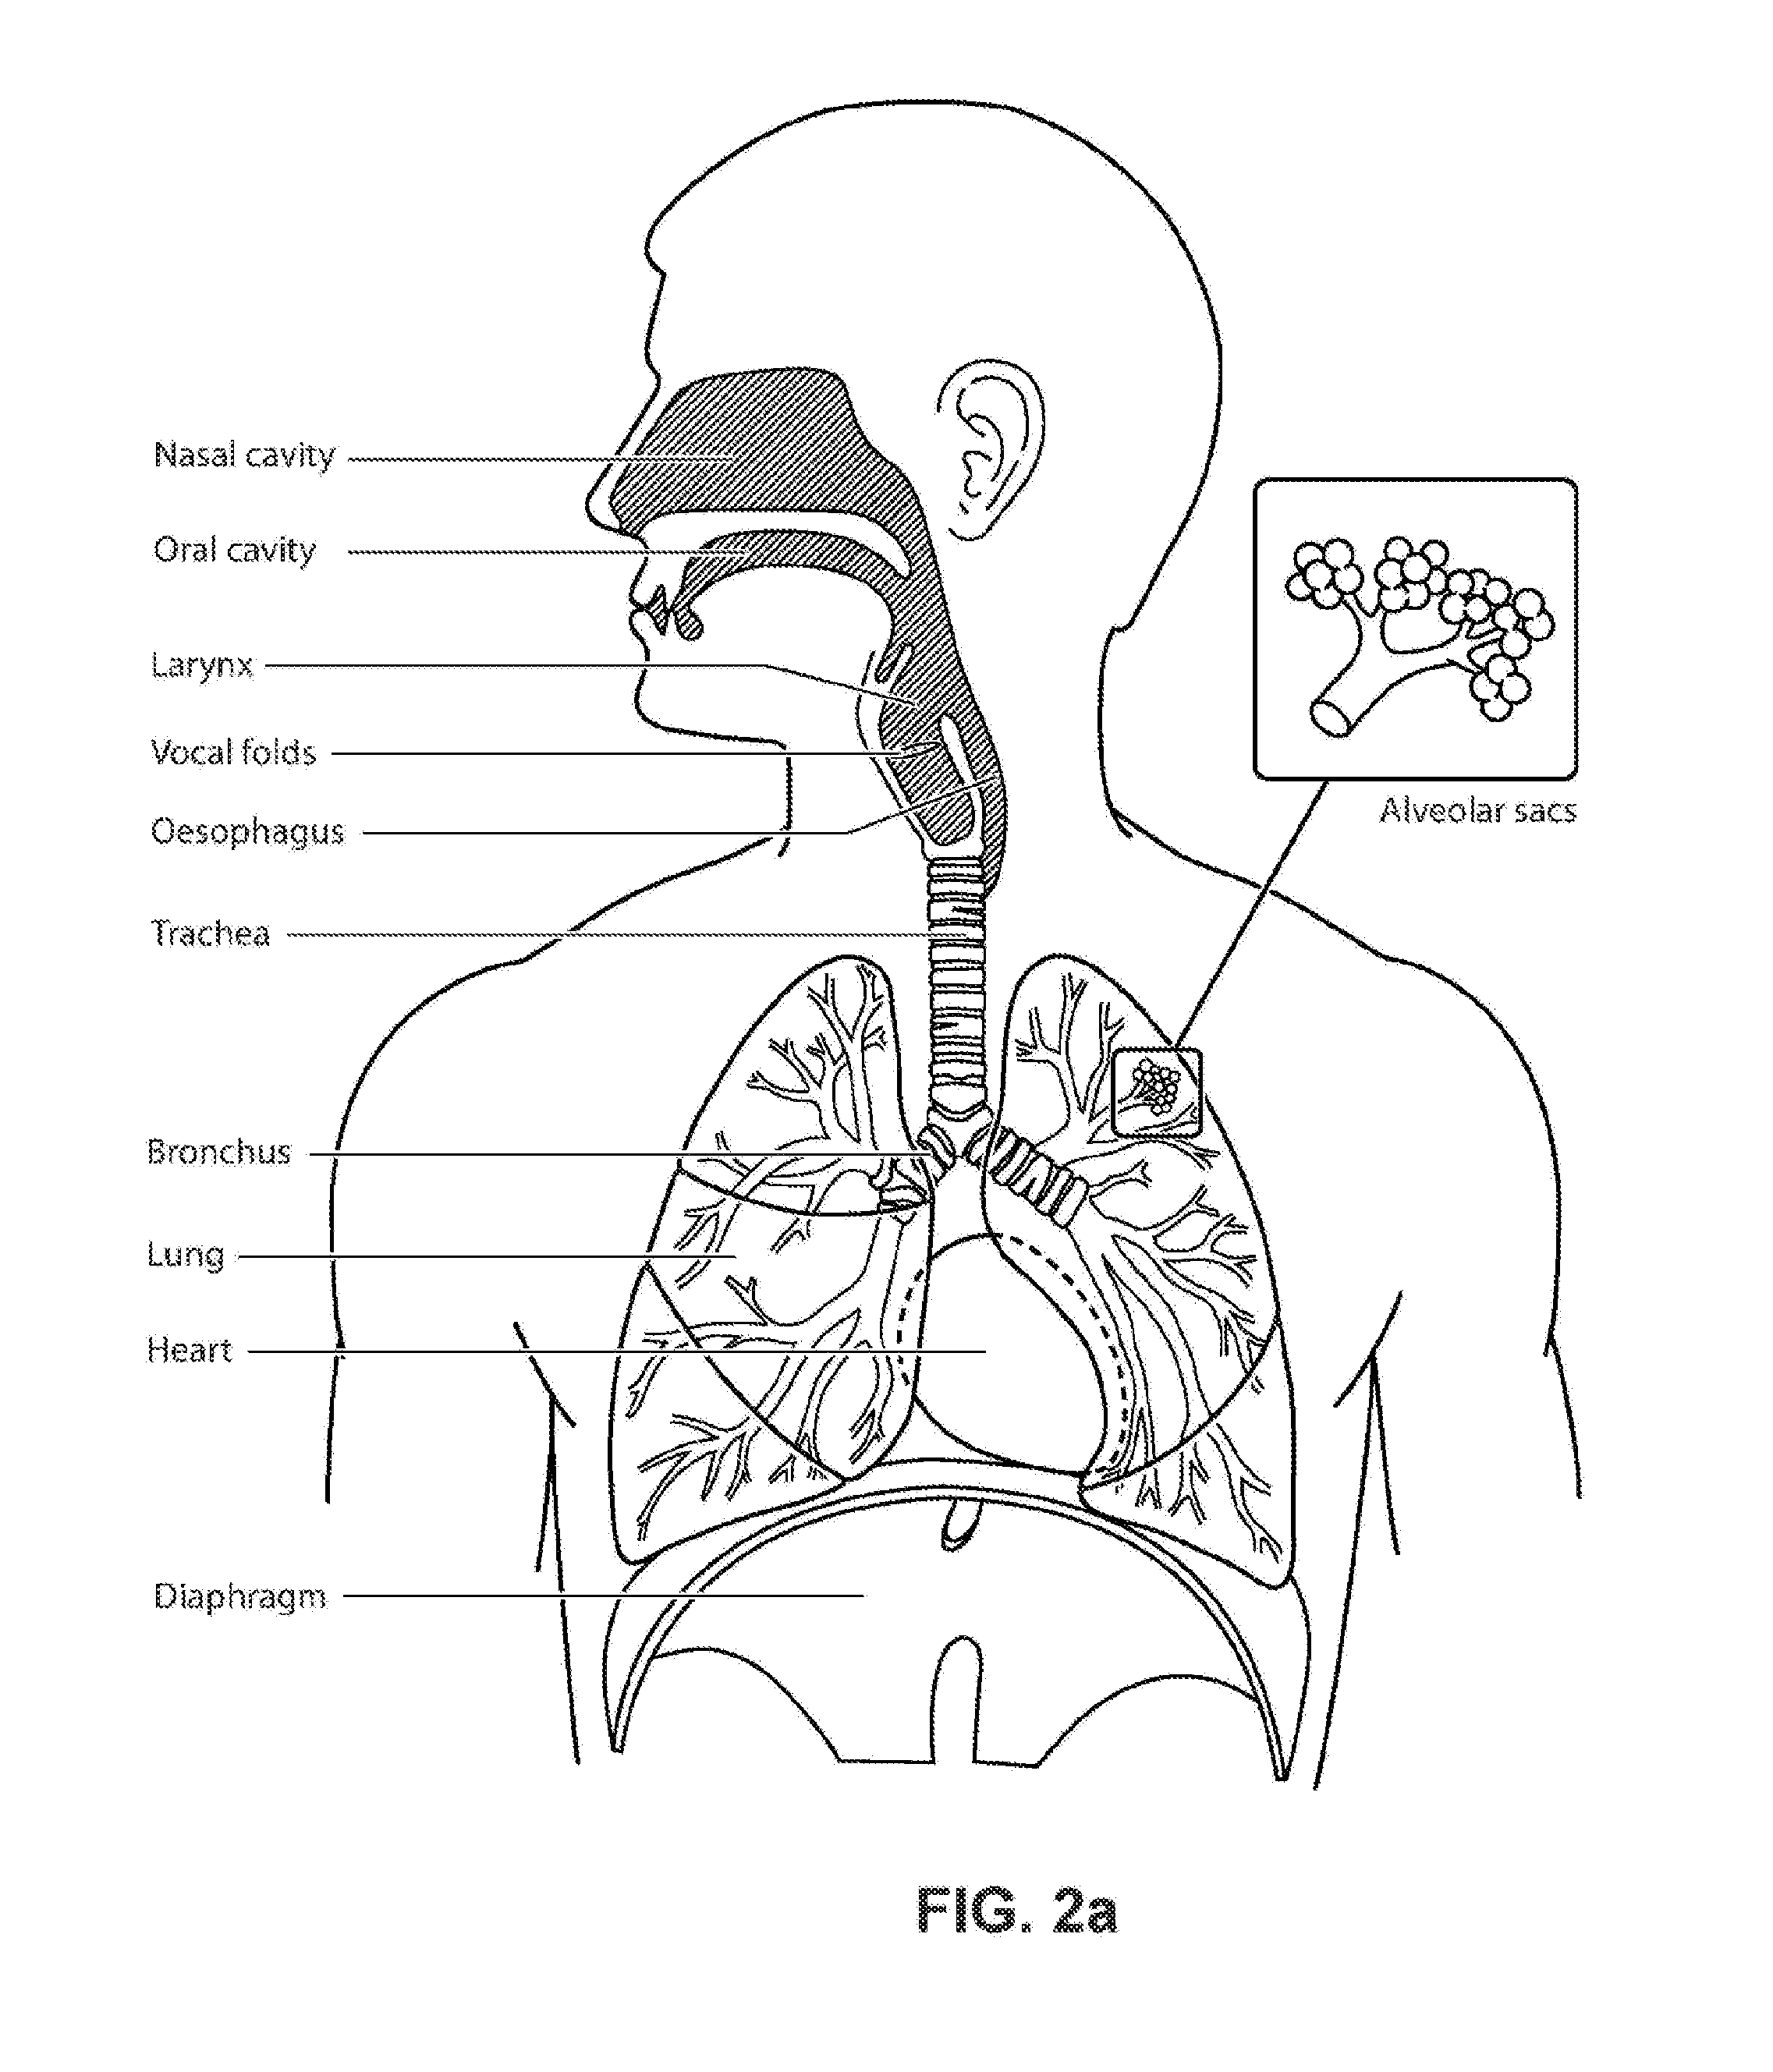 A patient interface system for treatment of respiratory disorders